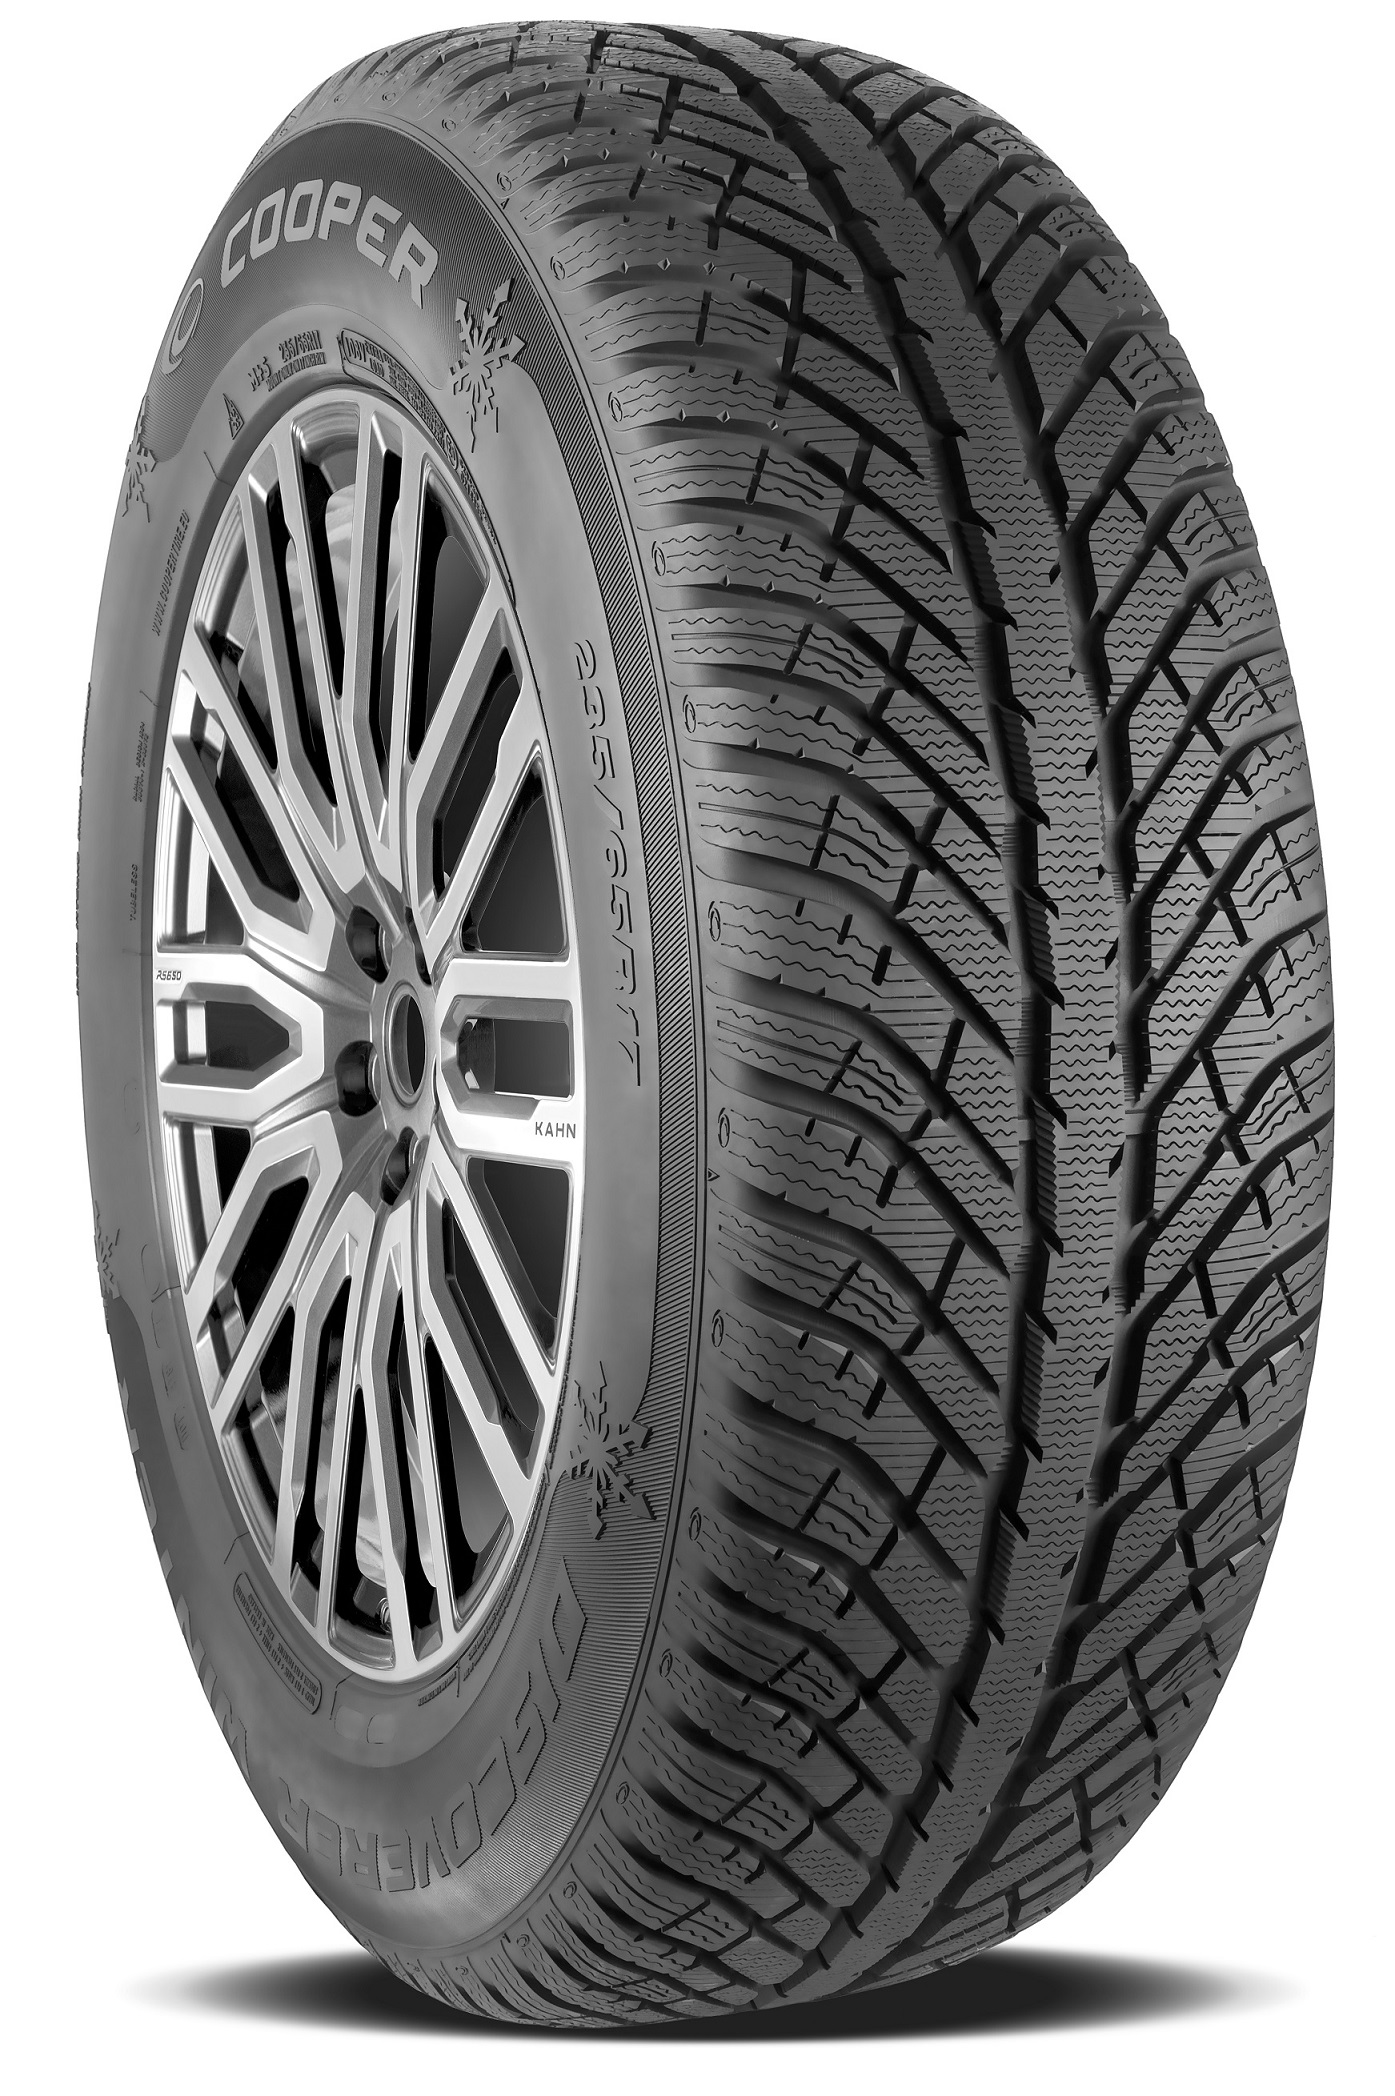 Gomme Nuove Cooper Tyres 225/50 R18 99V DISCOVERER WINTER M+S pneumatici nuovi Invernale